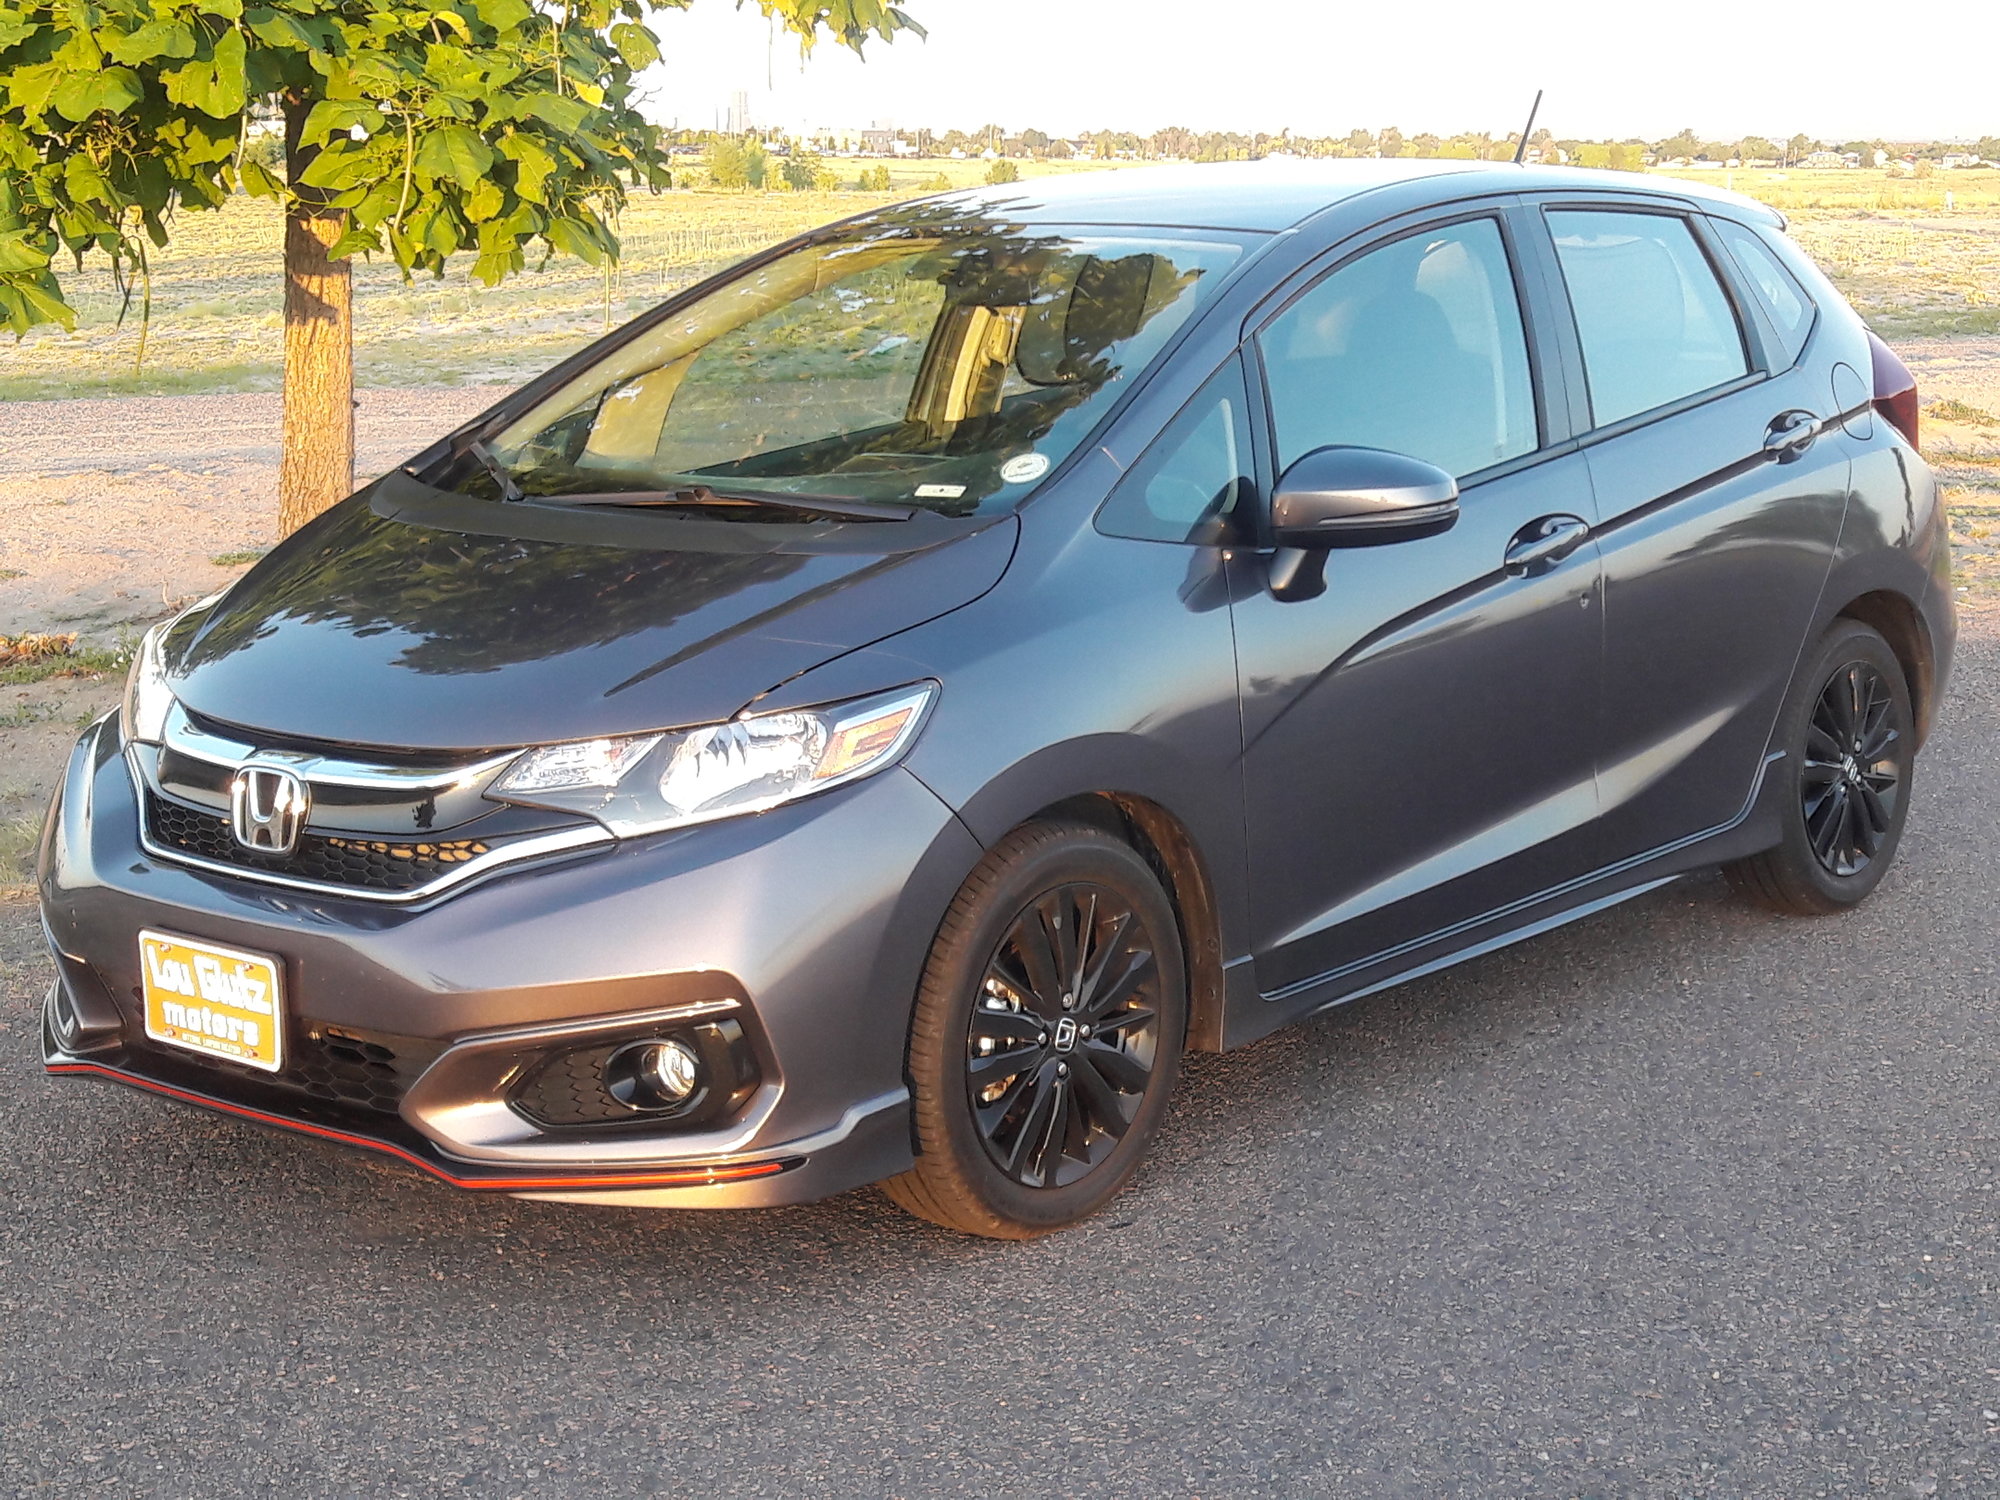 New Fit sport - Unofficial Honda FIT Forums